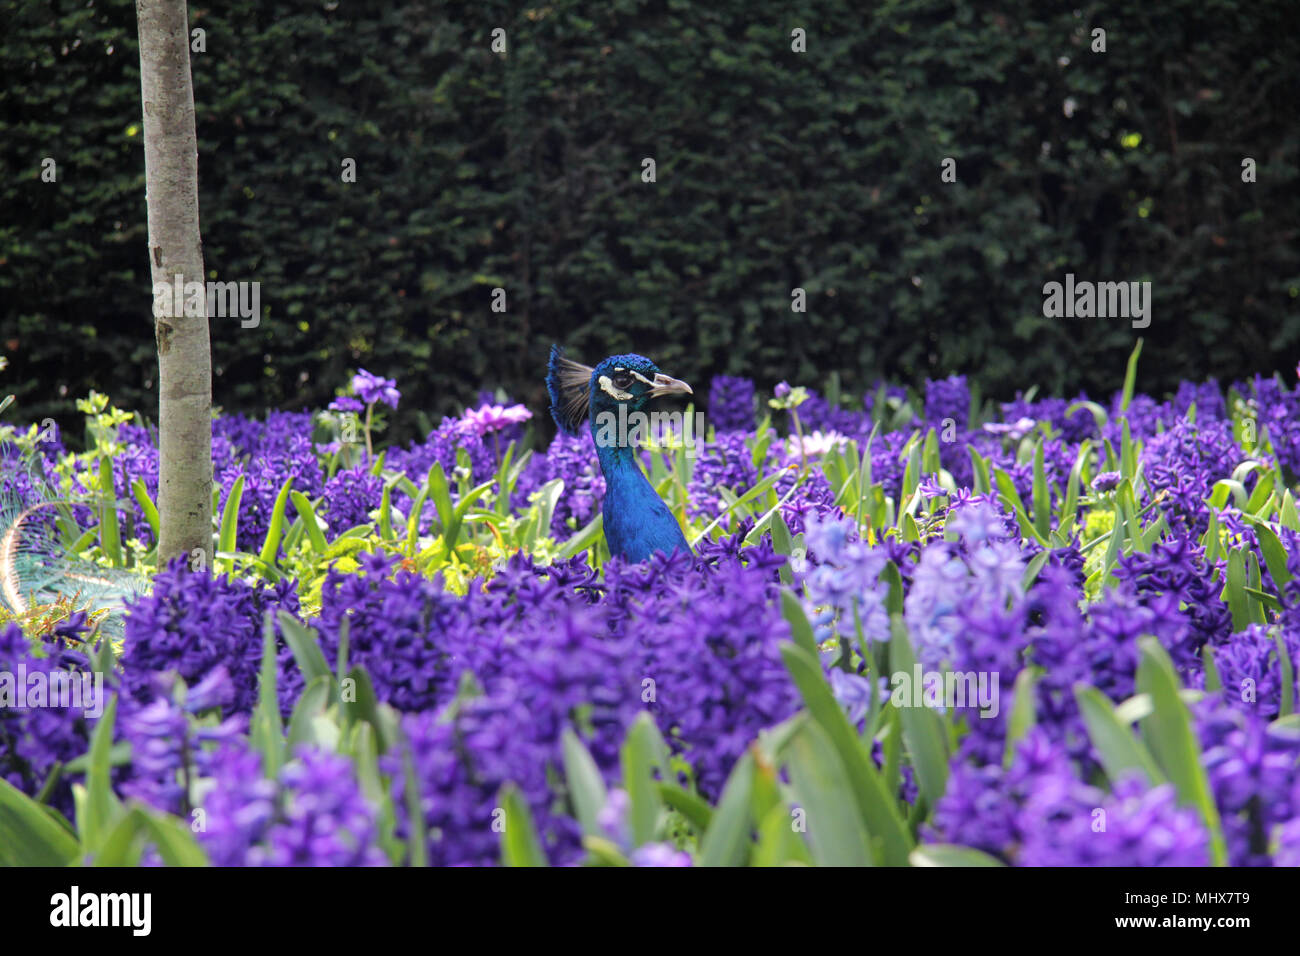 Brilliant Blue Peacock resting in a purple flower bed, Male Indian Peacock Stock Photo